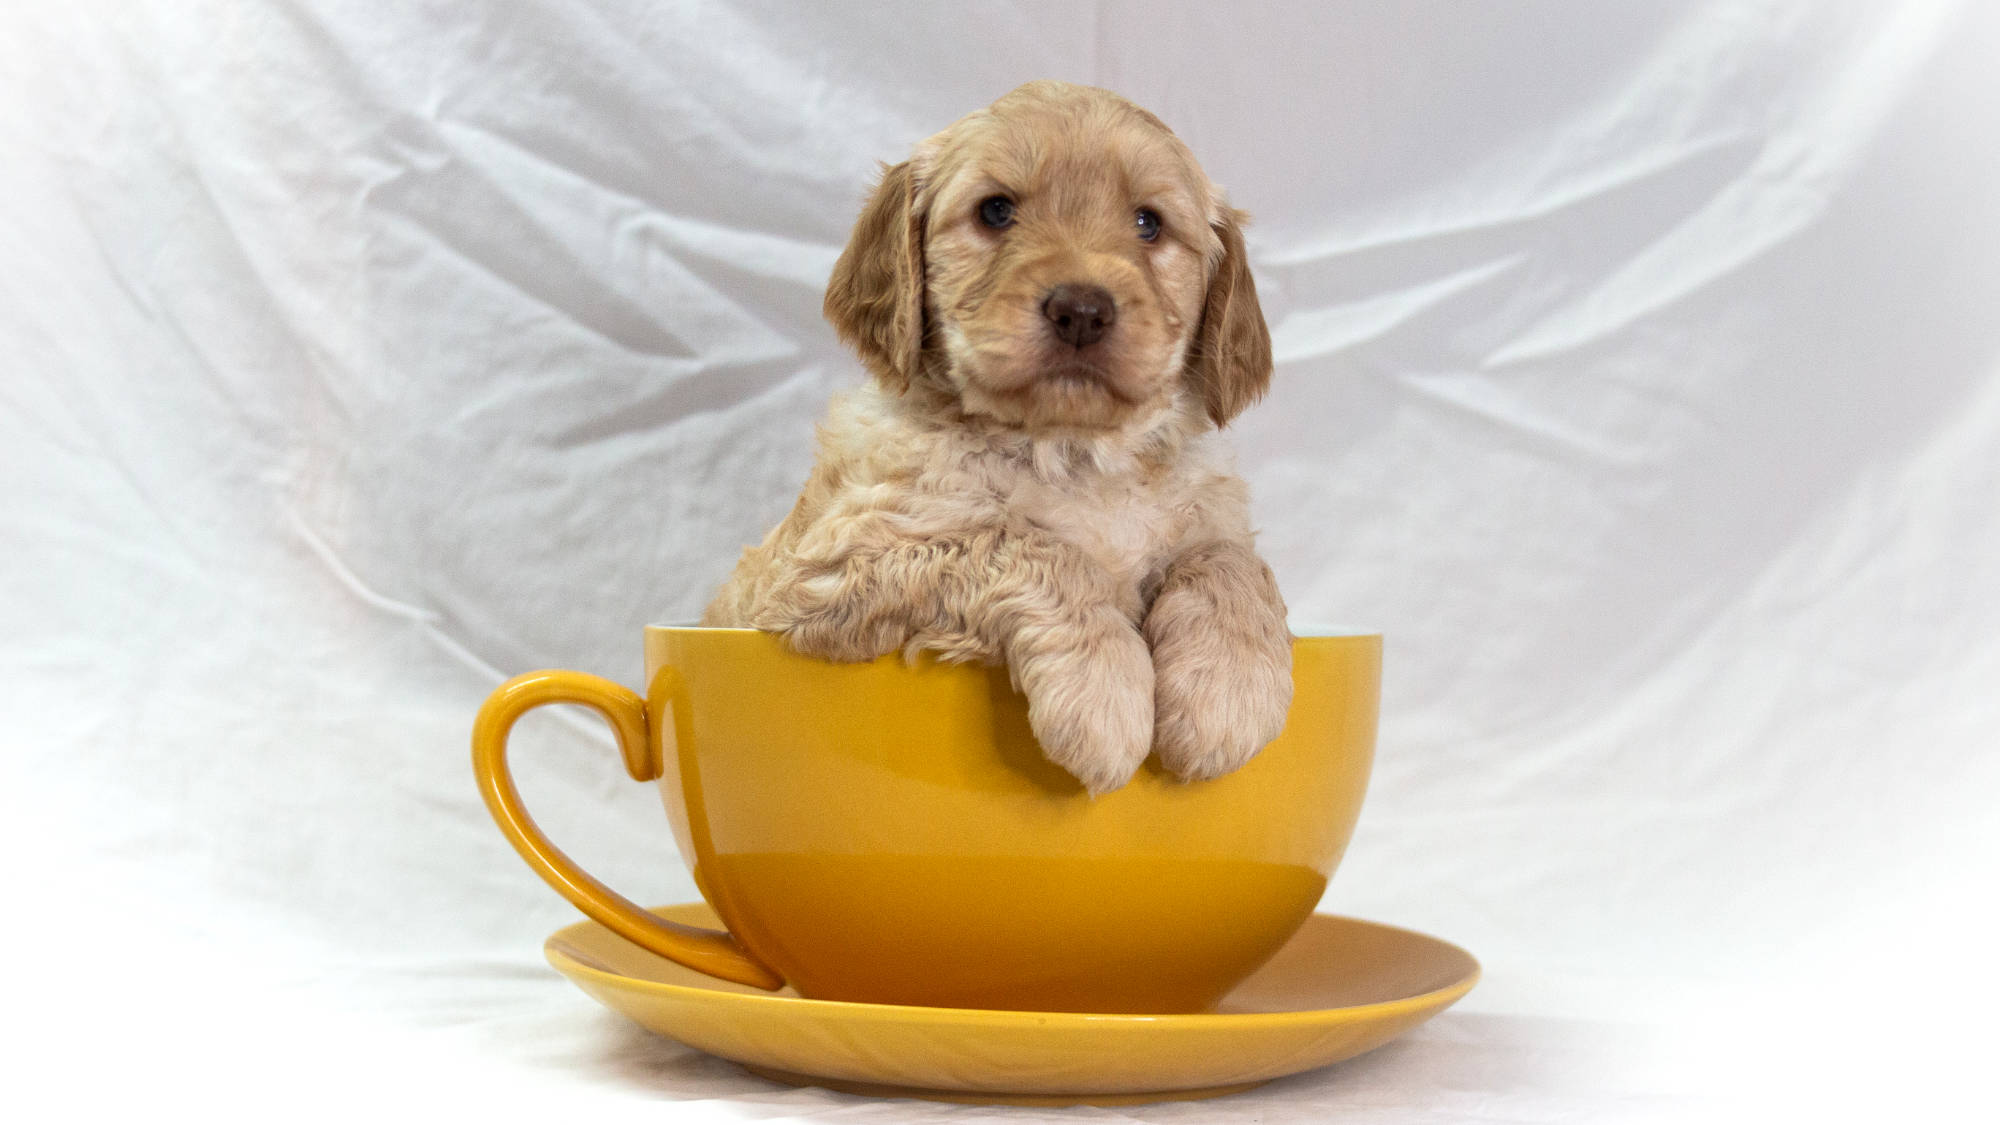 5 week old Australian Labradoodle Puppy sitting in a teacup - form Big Rock Labradoodles Famous Dogs Litter